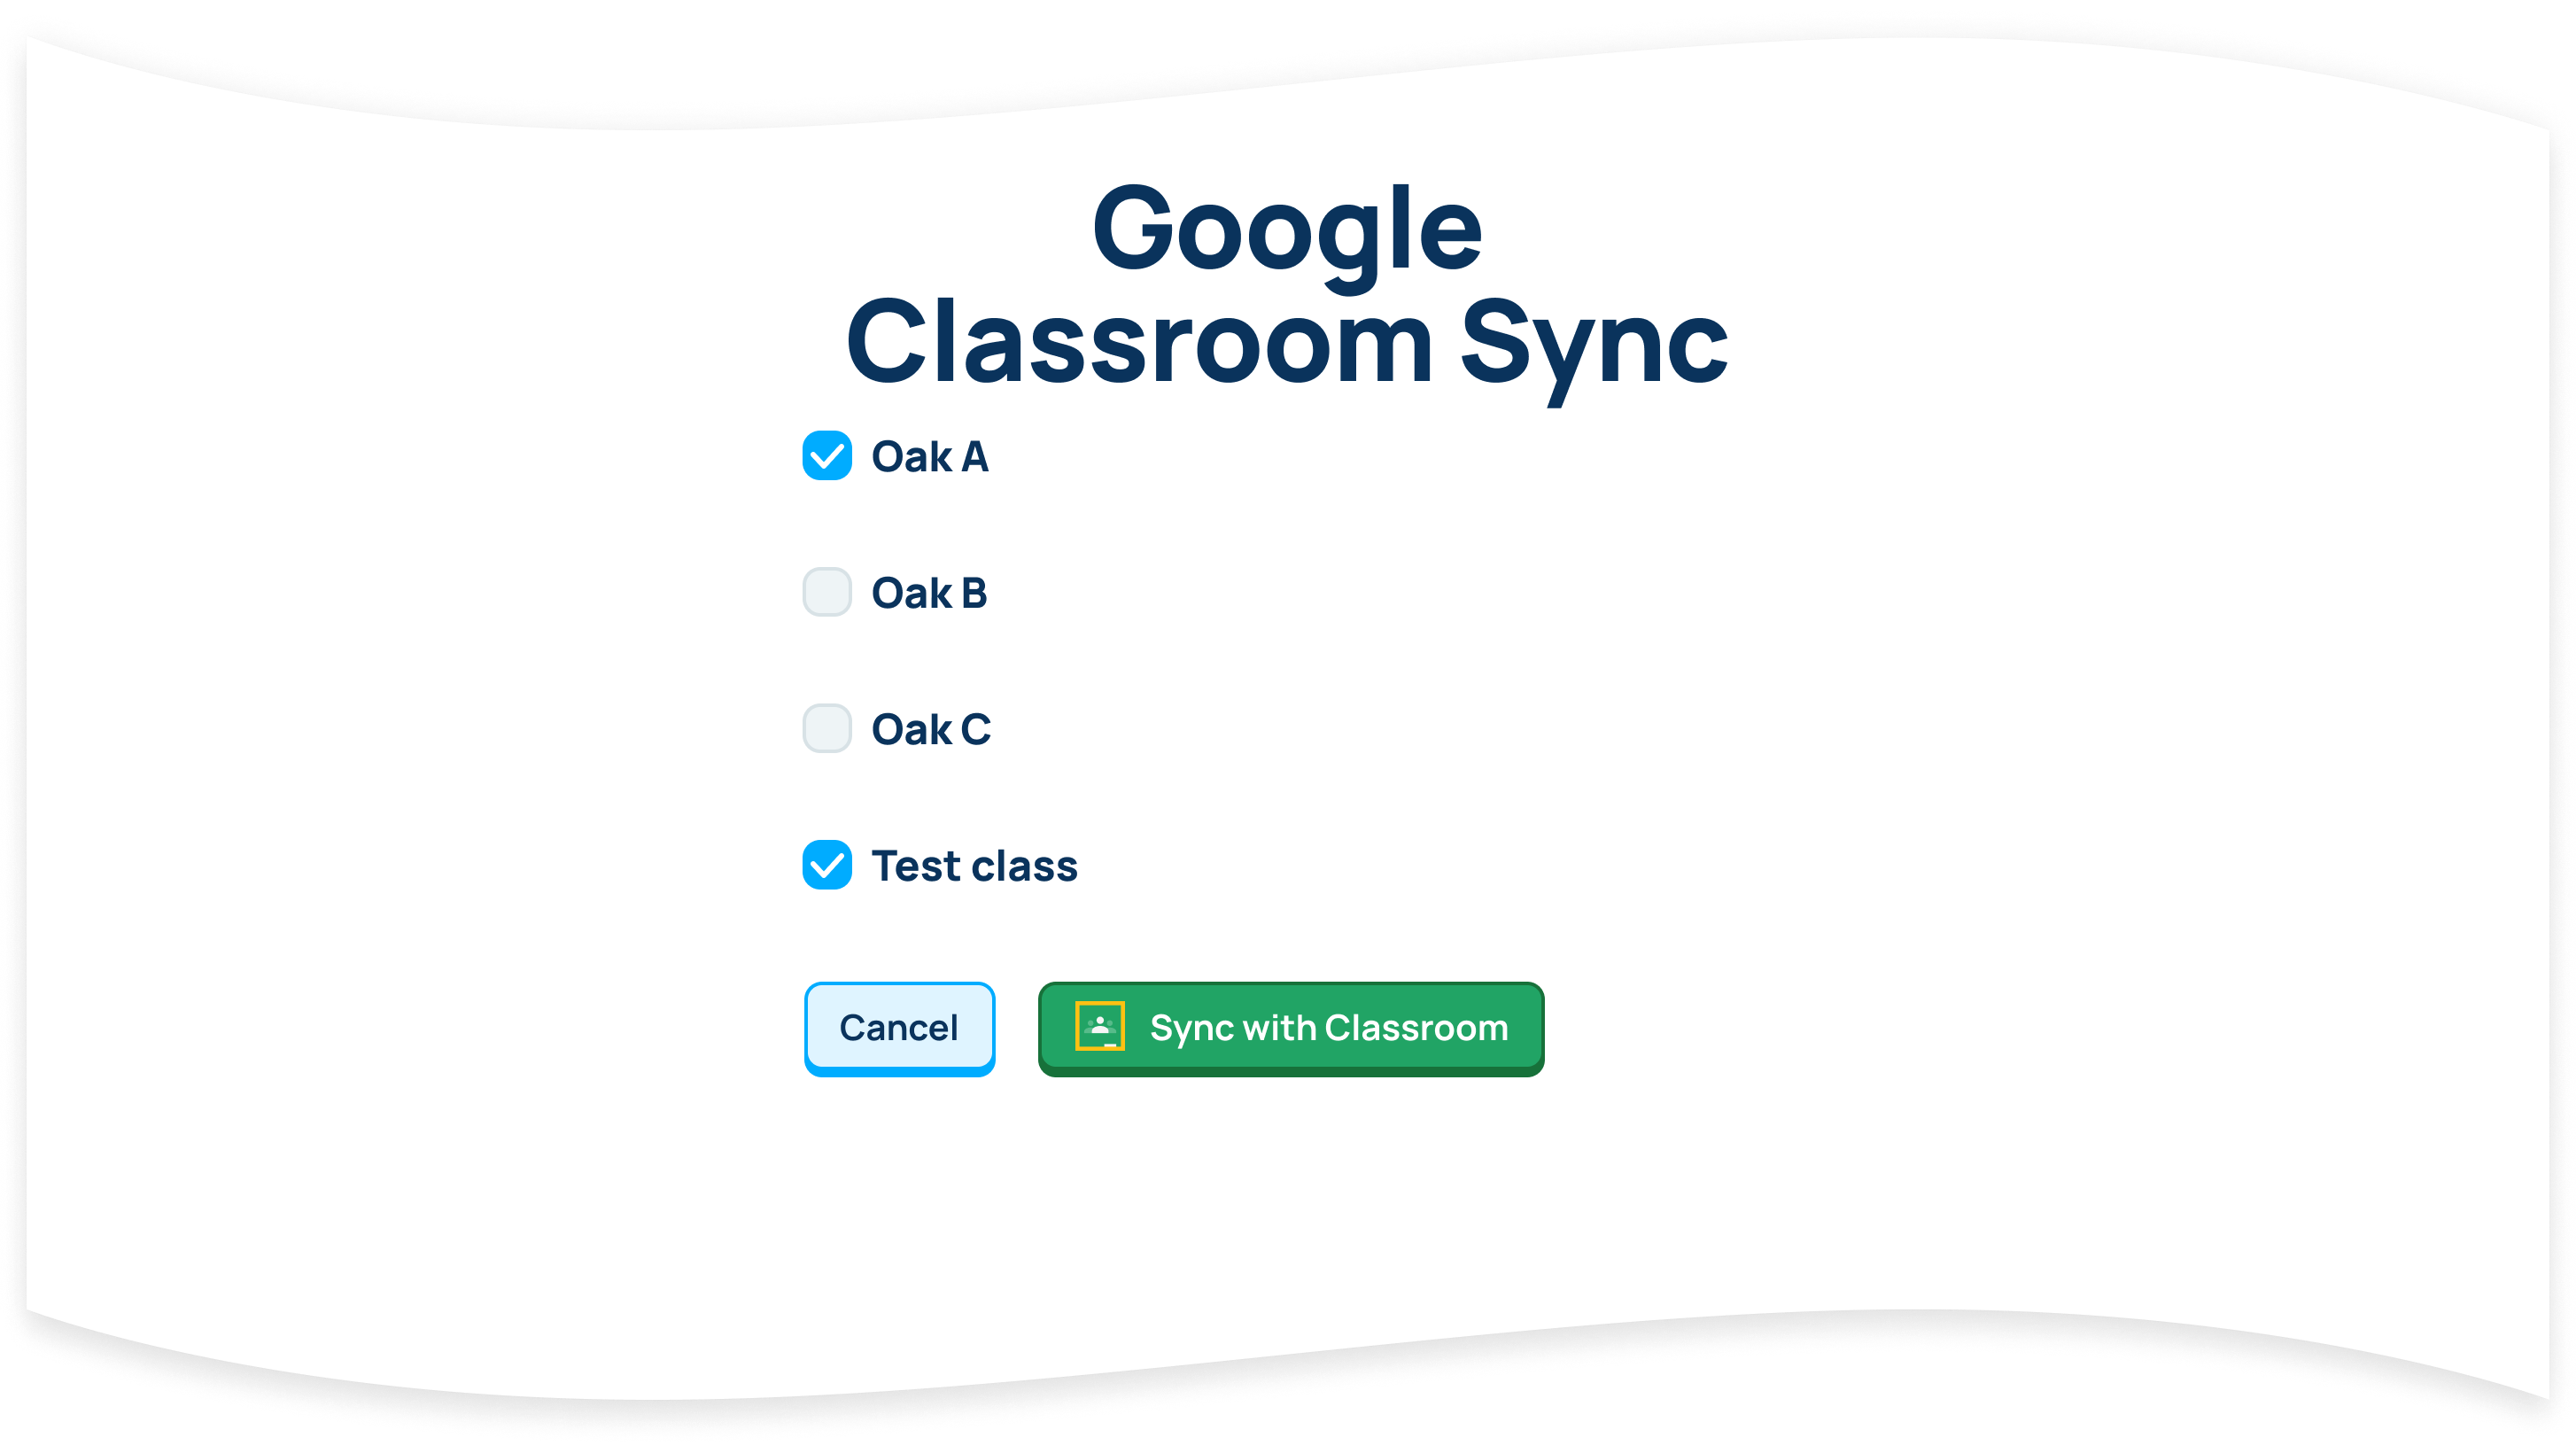 Select the classes you want to add to Ratatype and click the Sync to Classroom button. You can choose any number of classes.